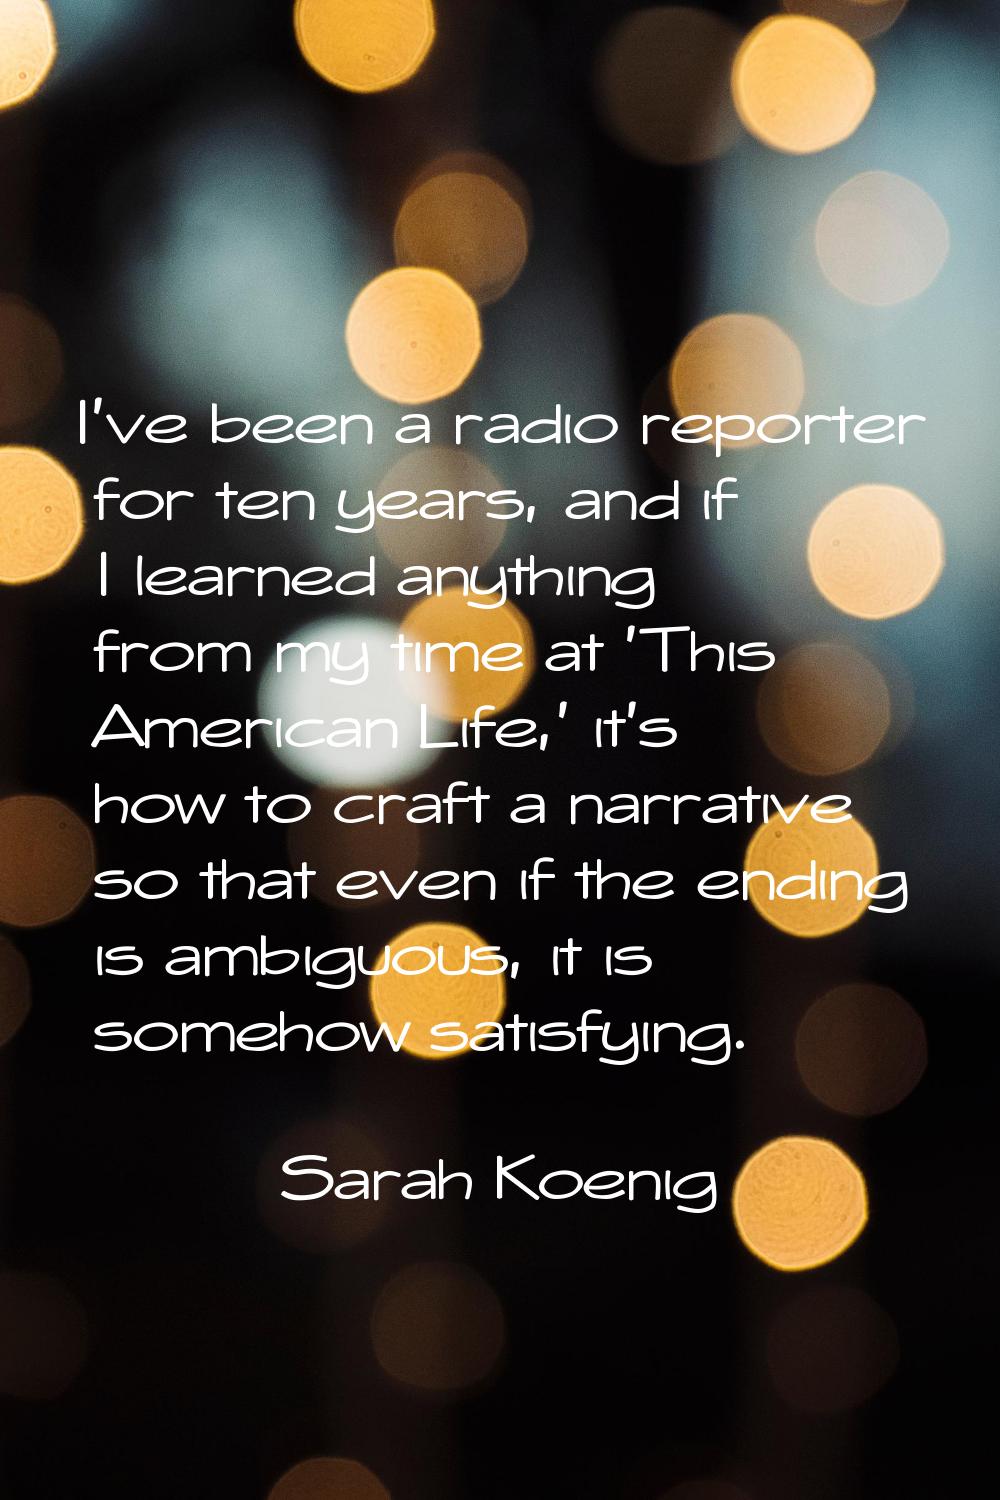 I've been a radio reporter for ten years, and if I learned anything from my time at 'This American 